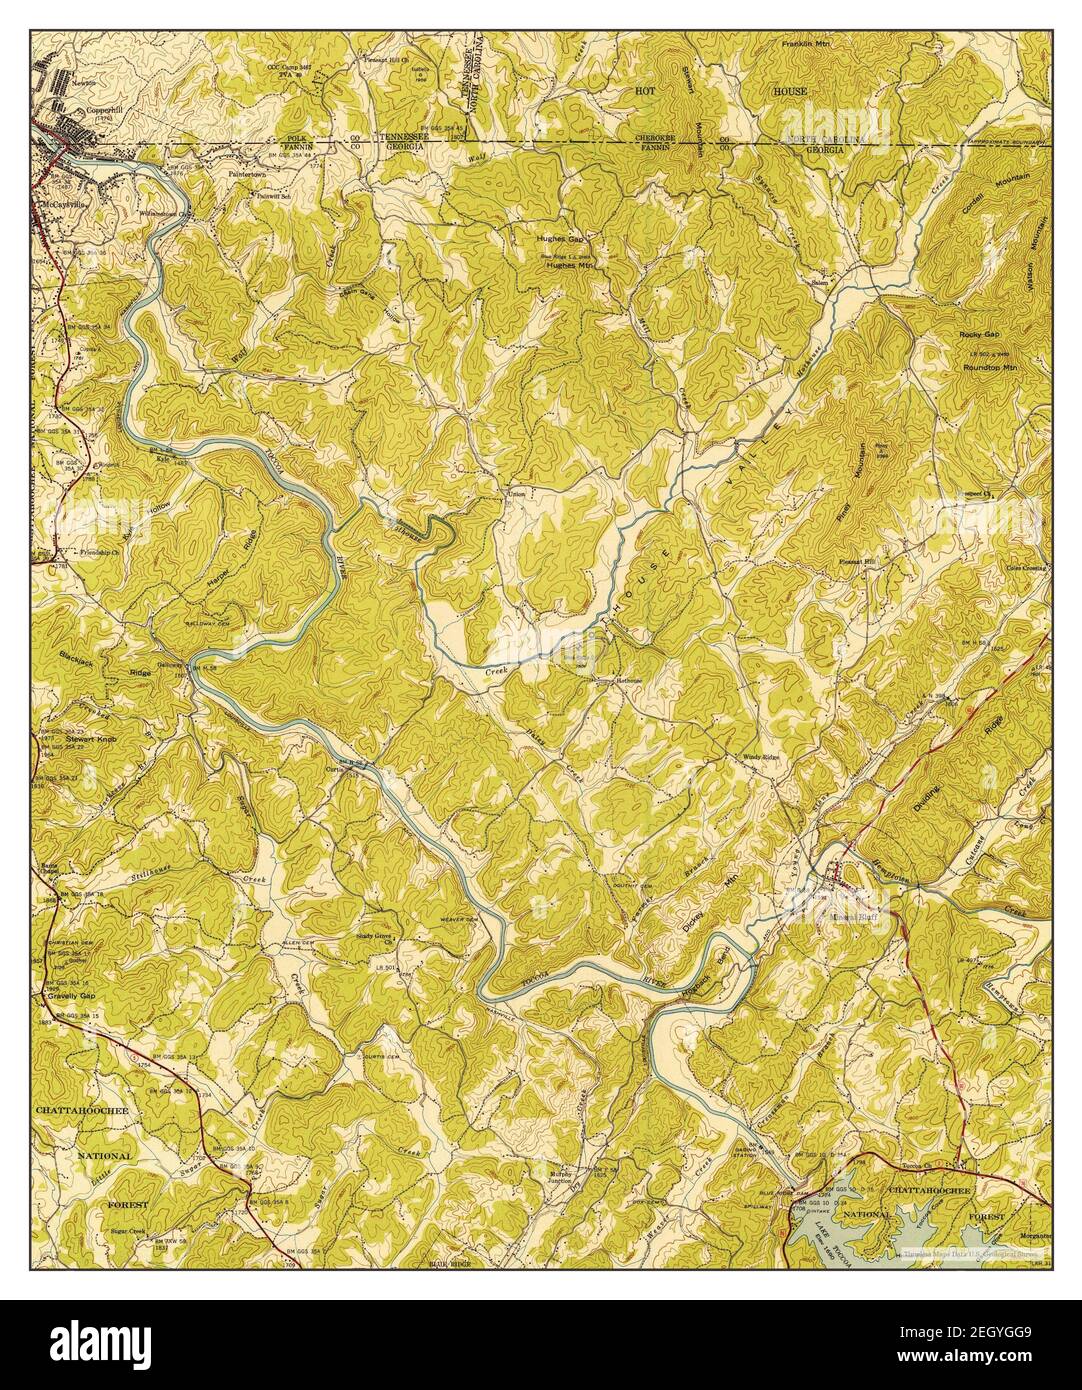 Mineral Bluff, Georgia, map 1943, 1:24000, United States of America by Timeless Maps, data U.S. Geological Survey Foto Stock